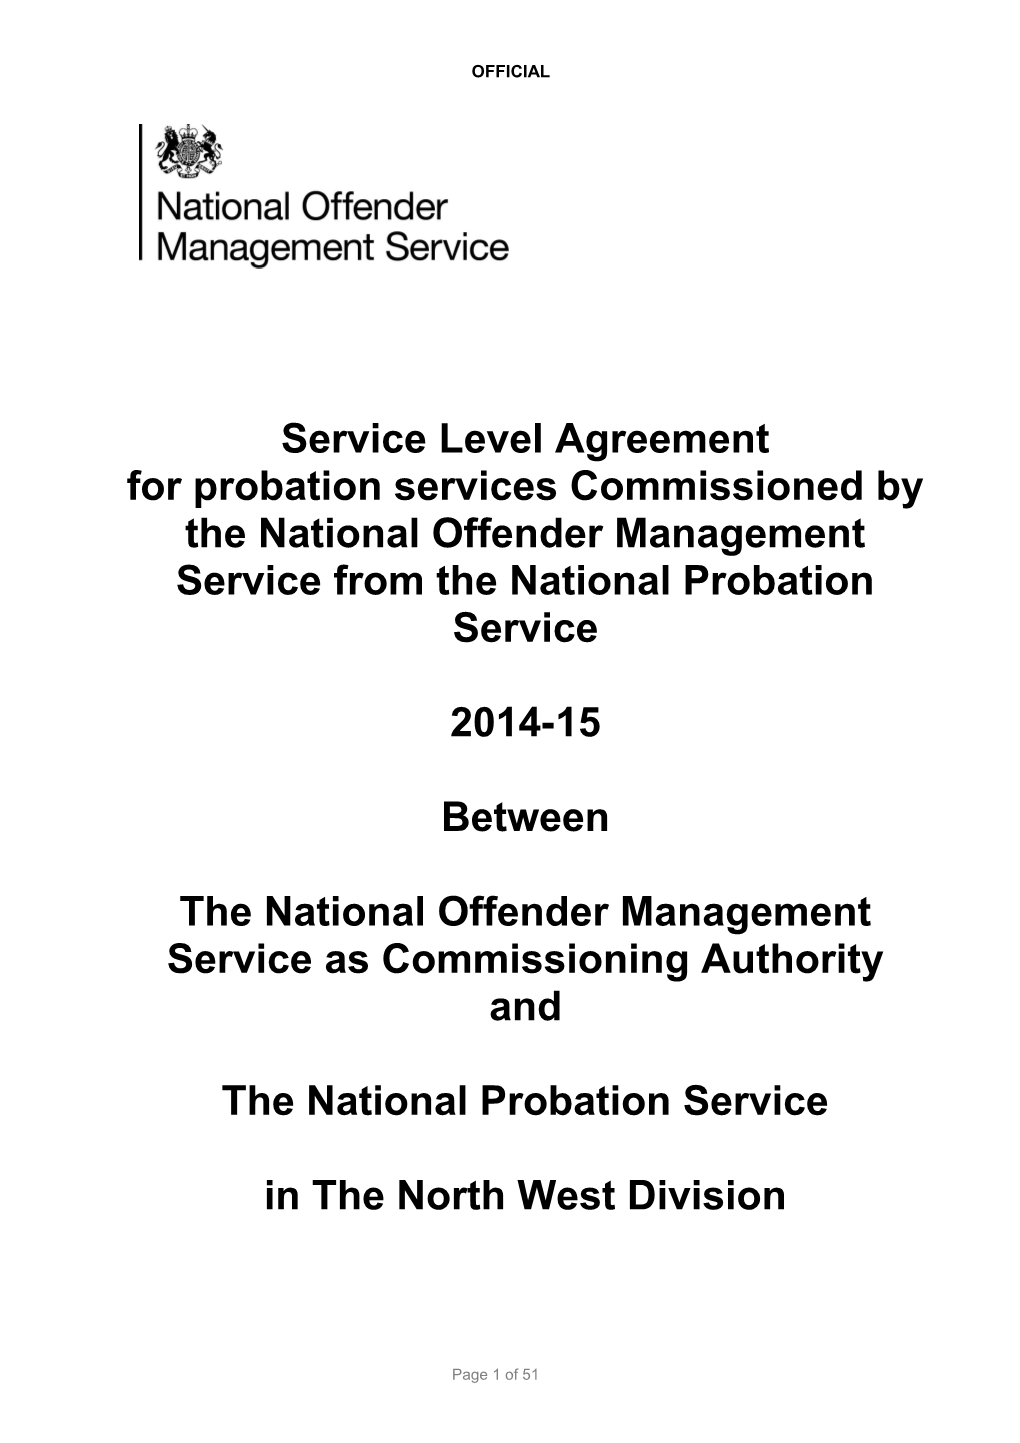 NPS Service Level Agreement 2014-15 NORTH WEST